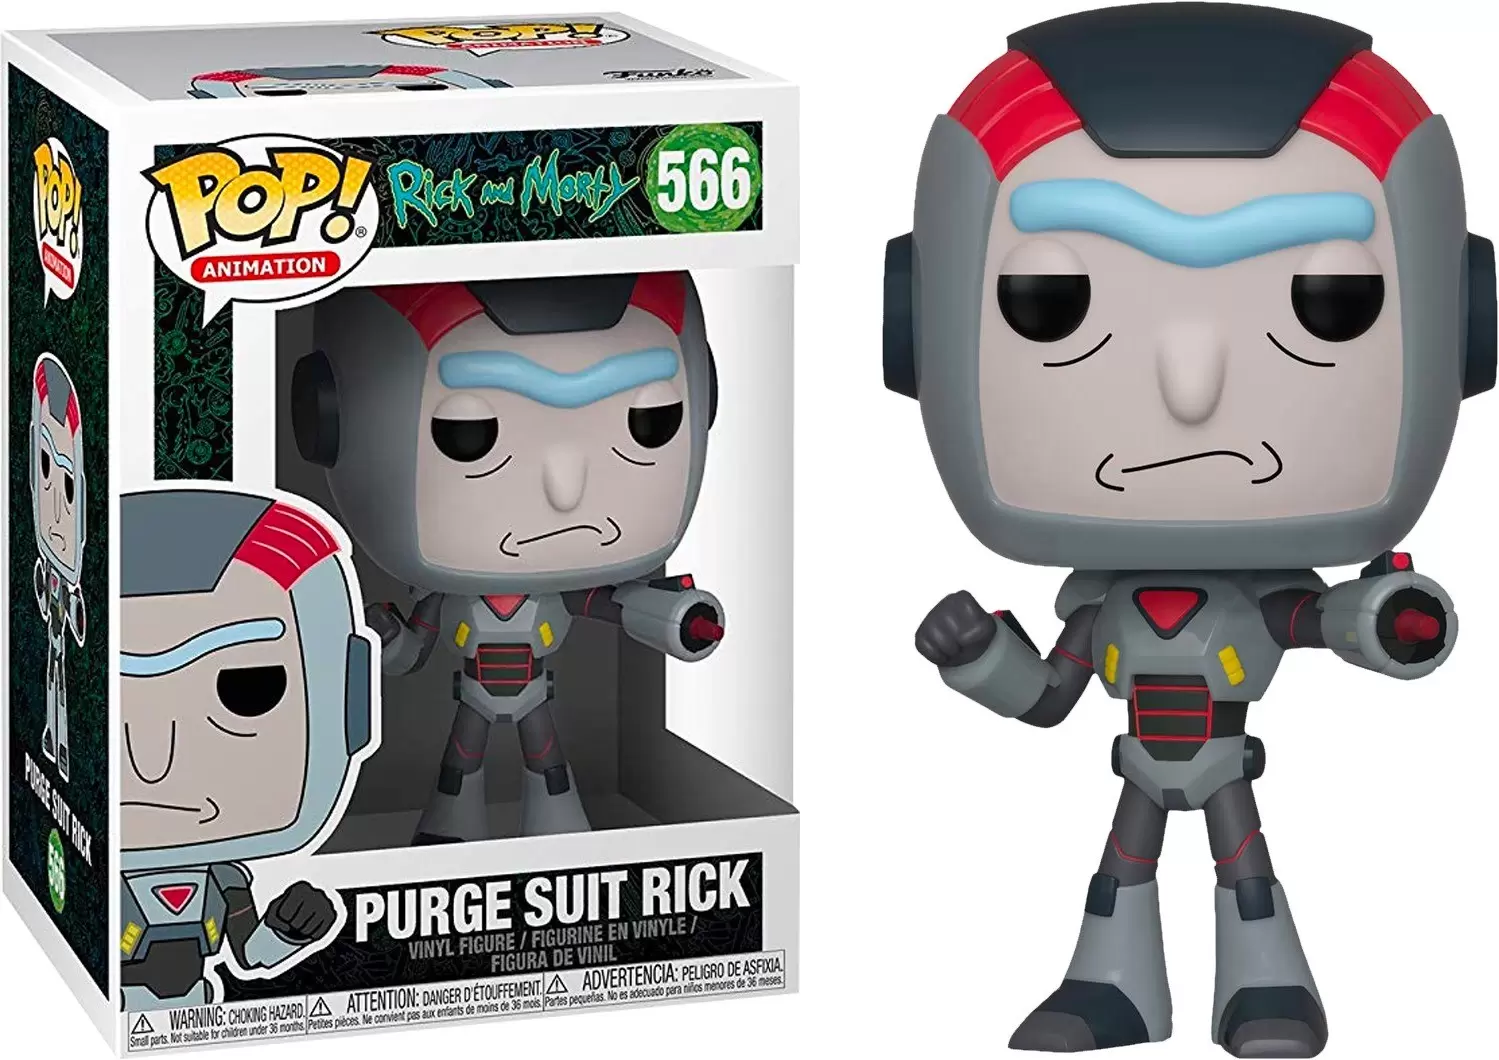 2019, Toy NEUF Animation: Funko Pop Purge Suit Morty Rick & Morty 